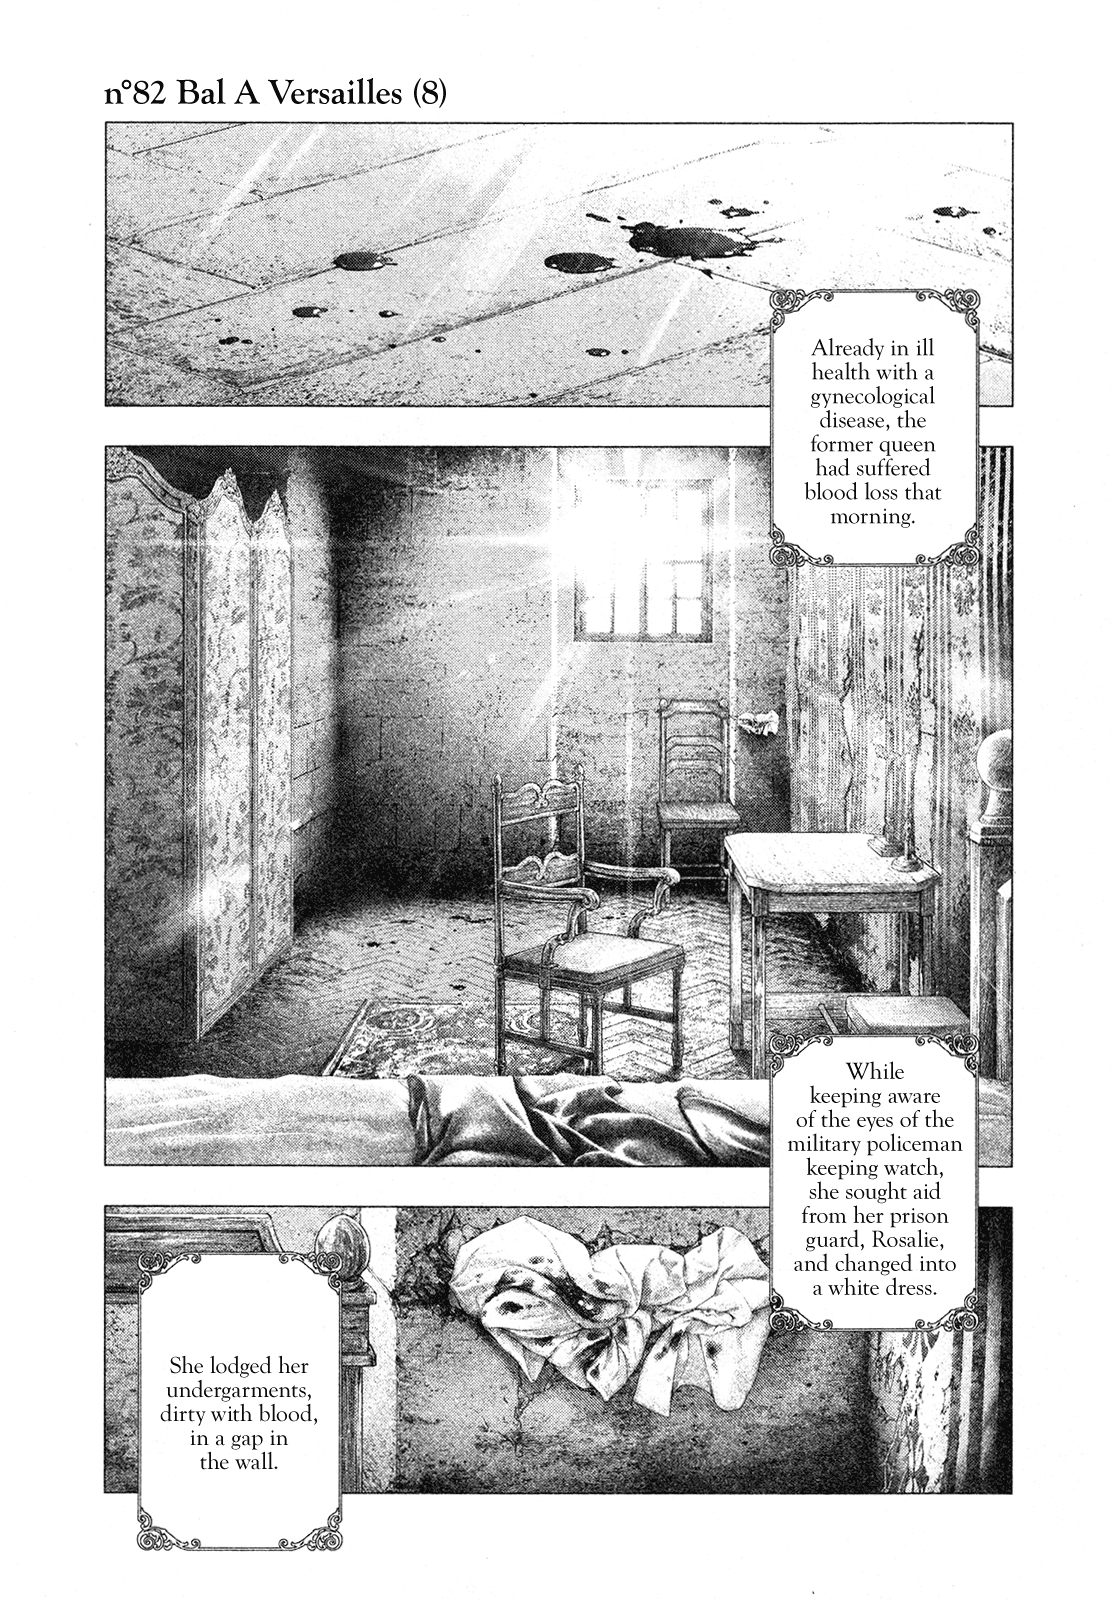 Innocent Rouge Vol.12-Chapter.82-Bal-a-Versailles-(8) Image